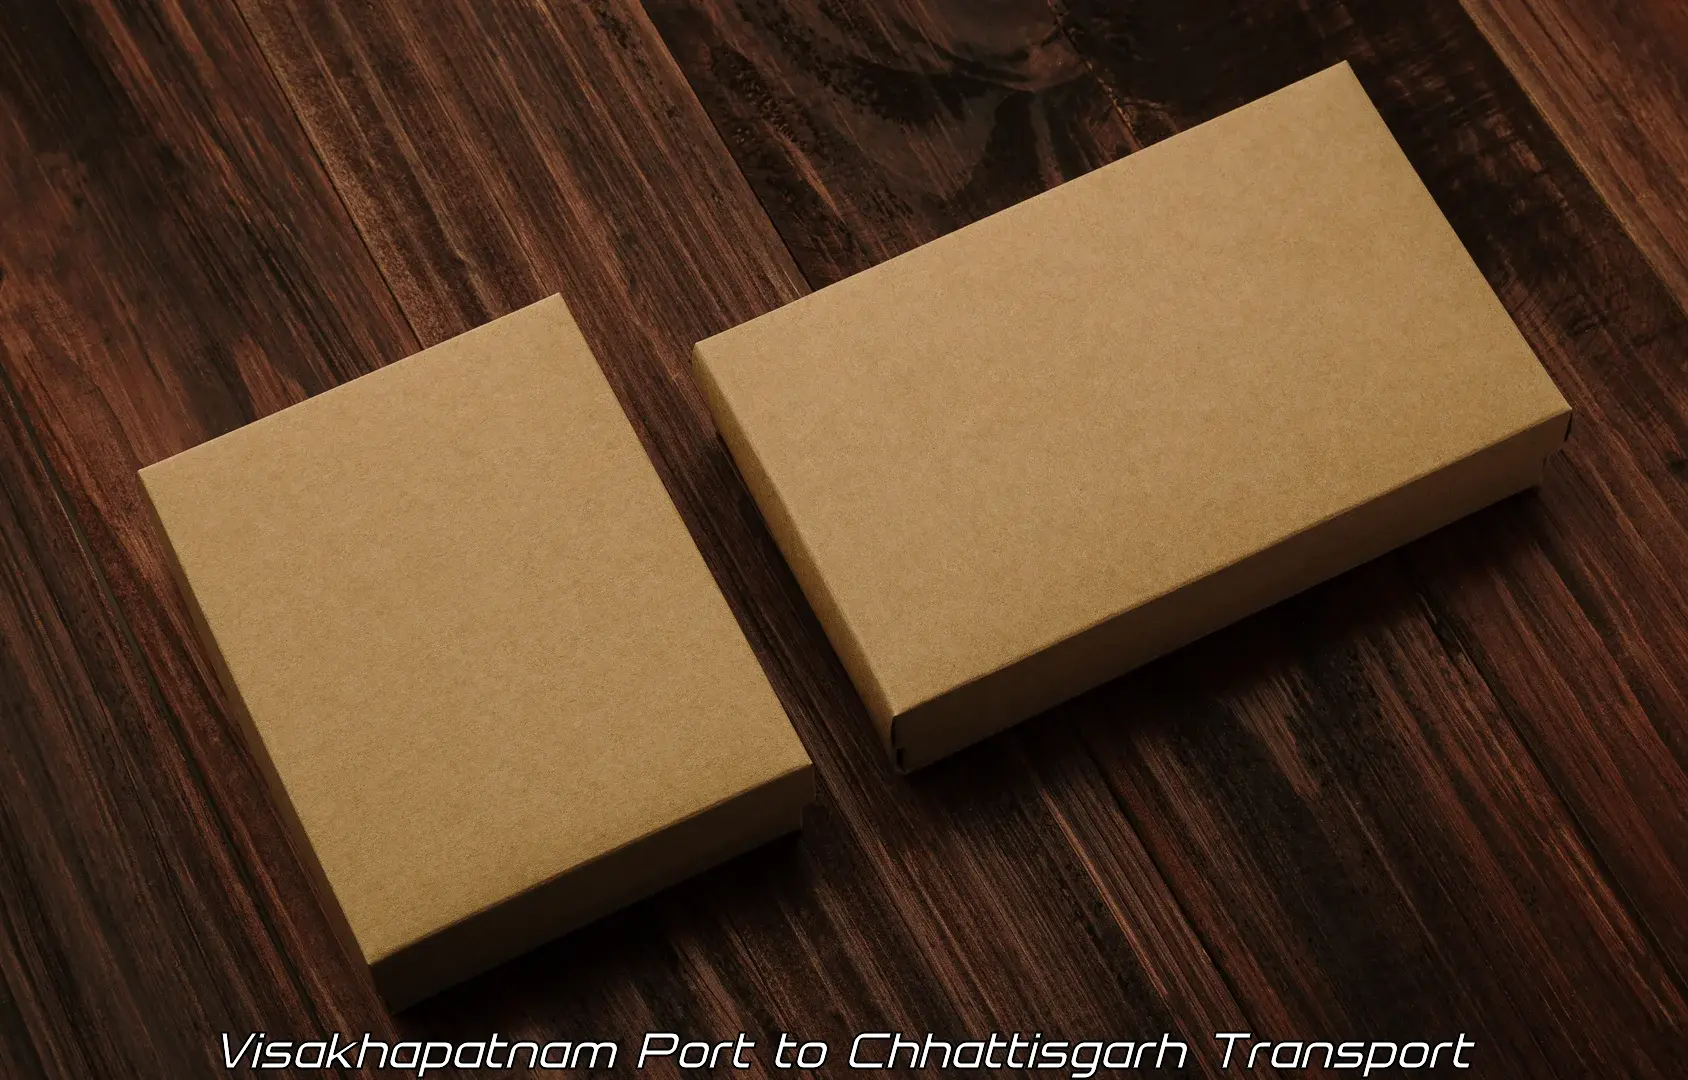 Package delivery services in Visakhapatnam Port to Pandariya